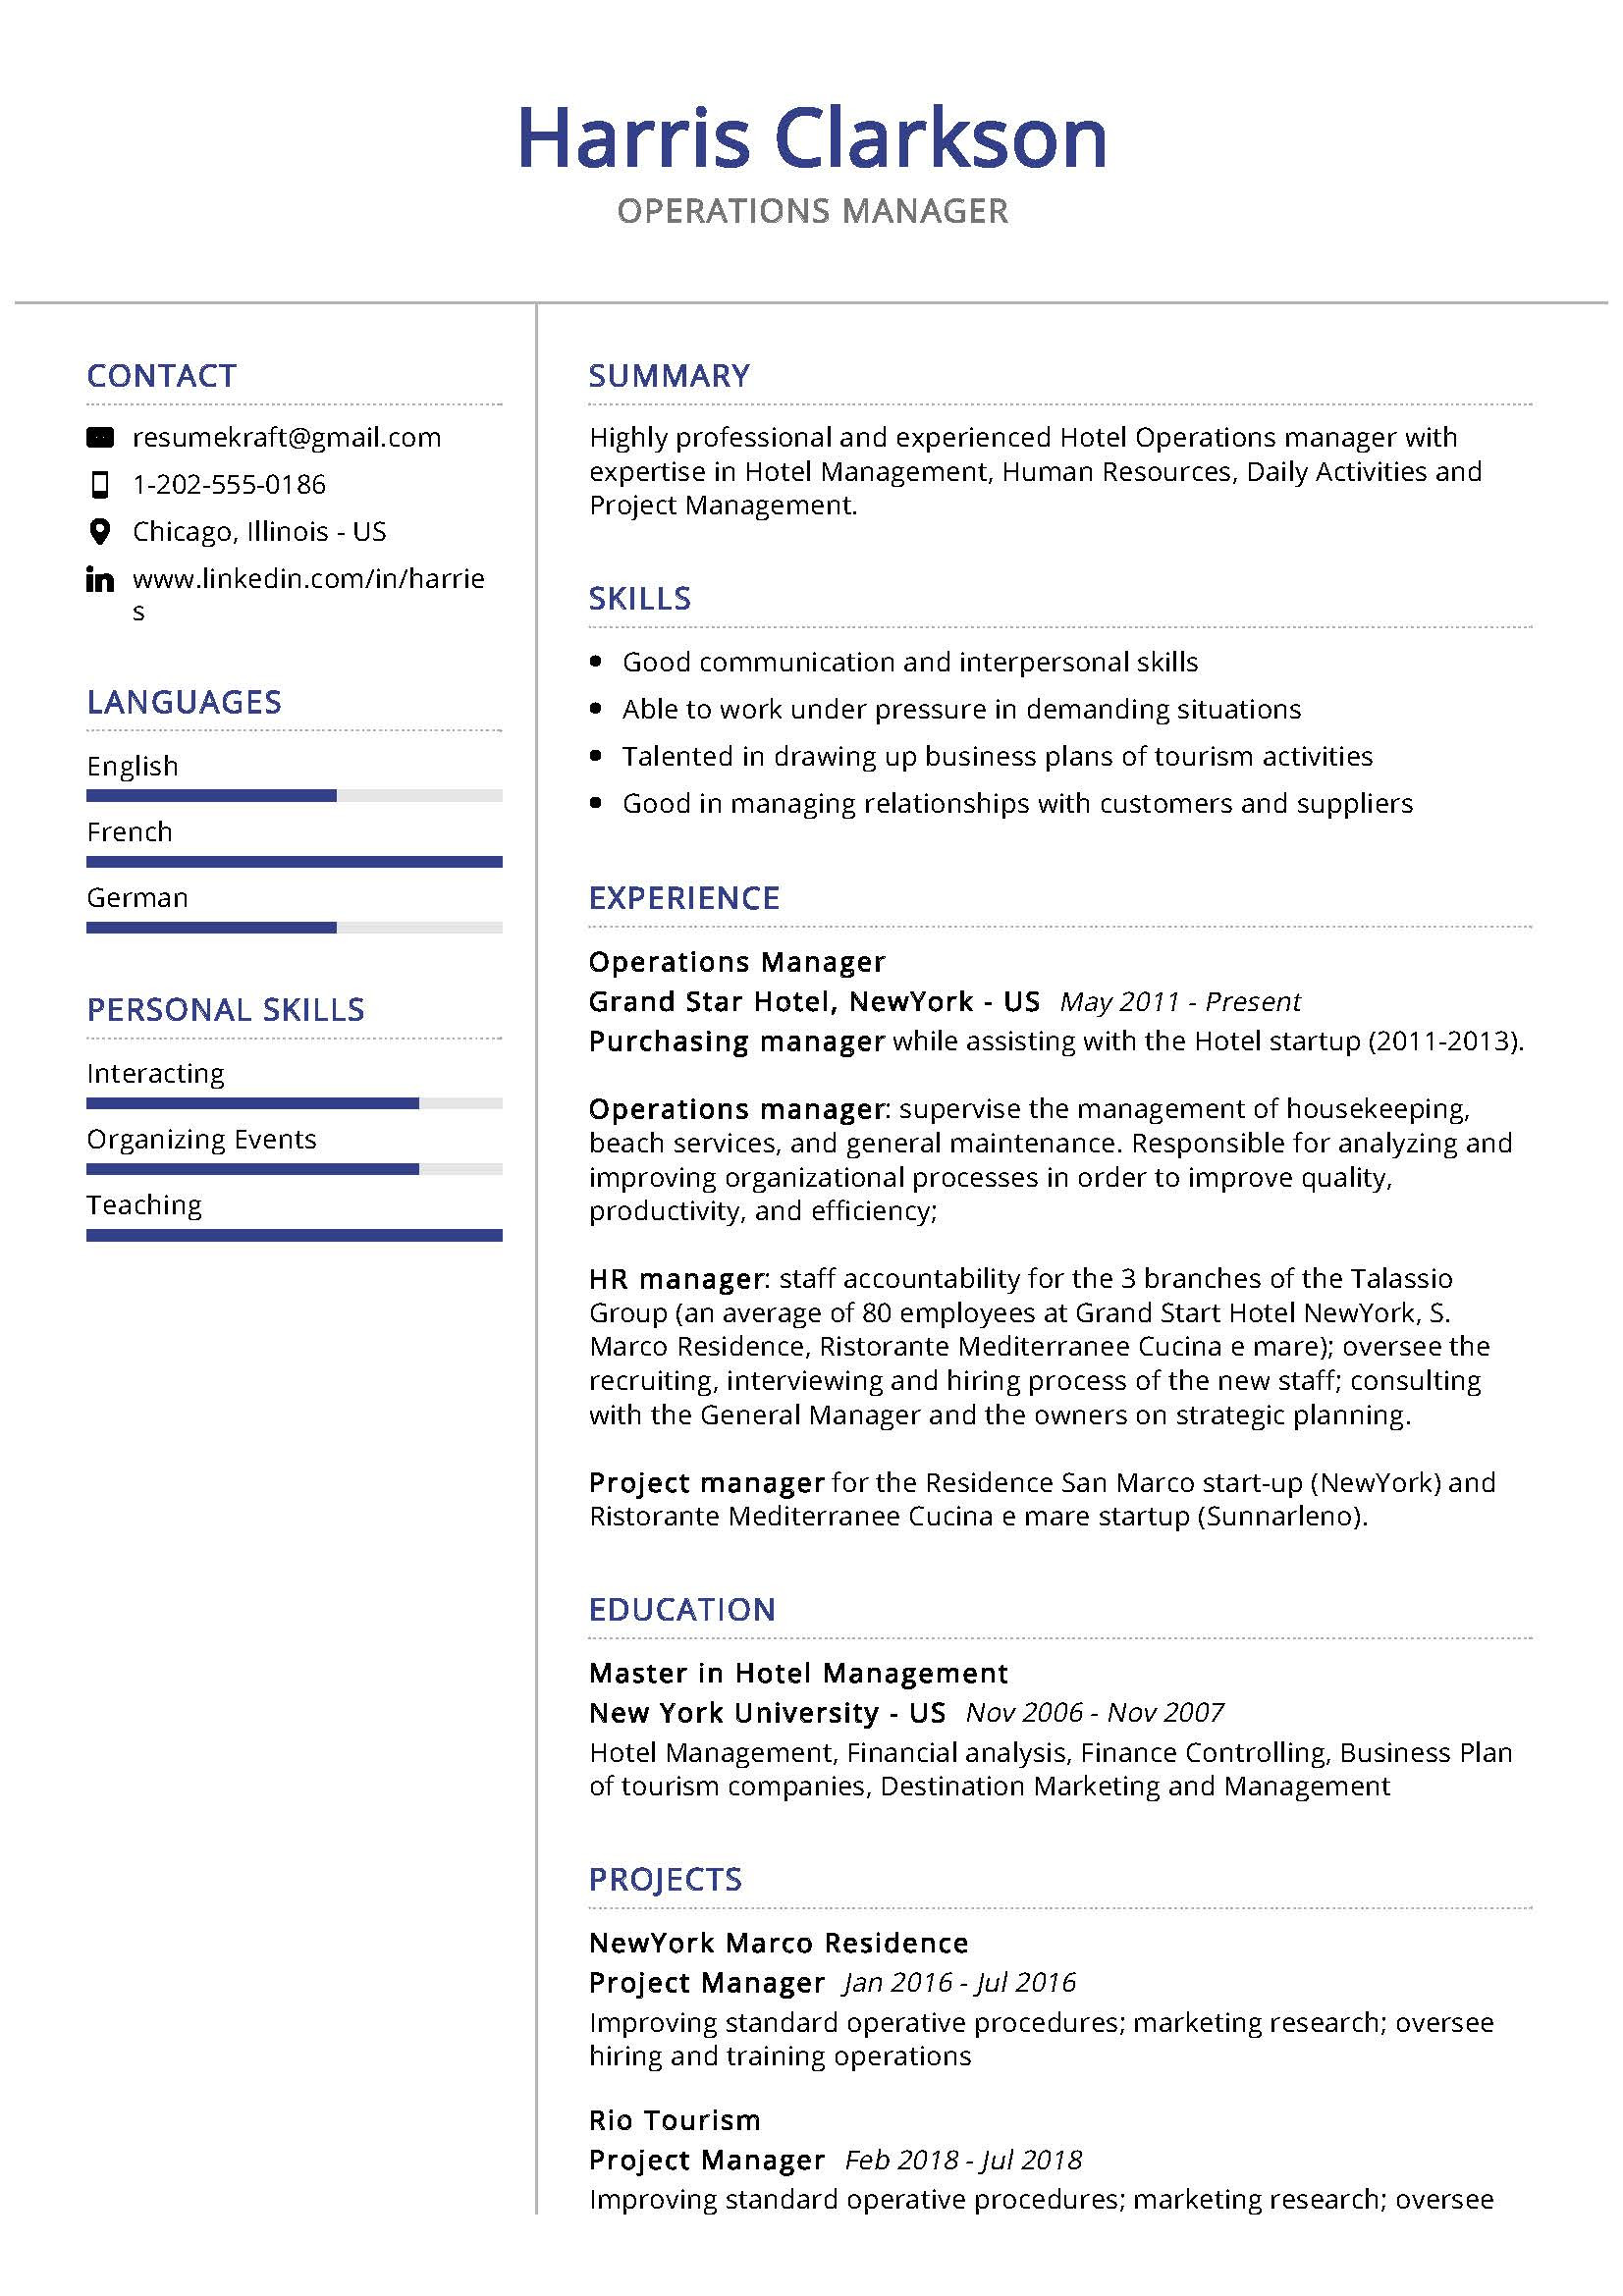 Operations Manager for Security Company Sample Resume Operations Manager Resume Sample 2022 Writing Tips – Resumekraft